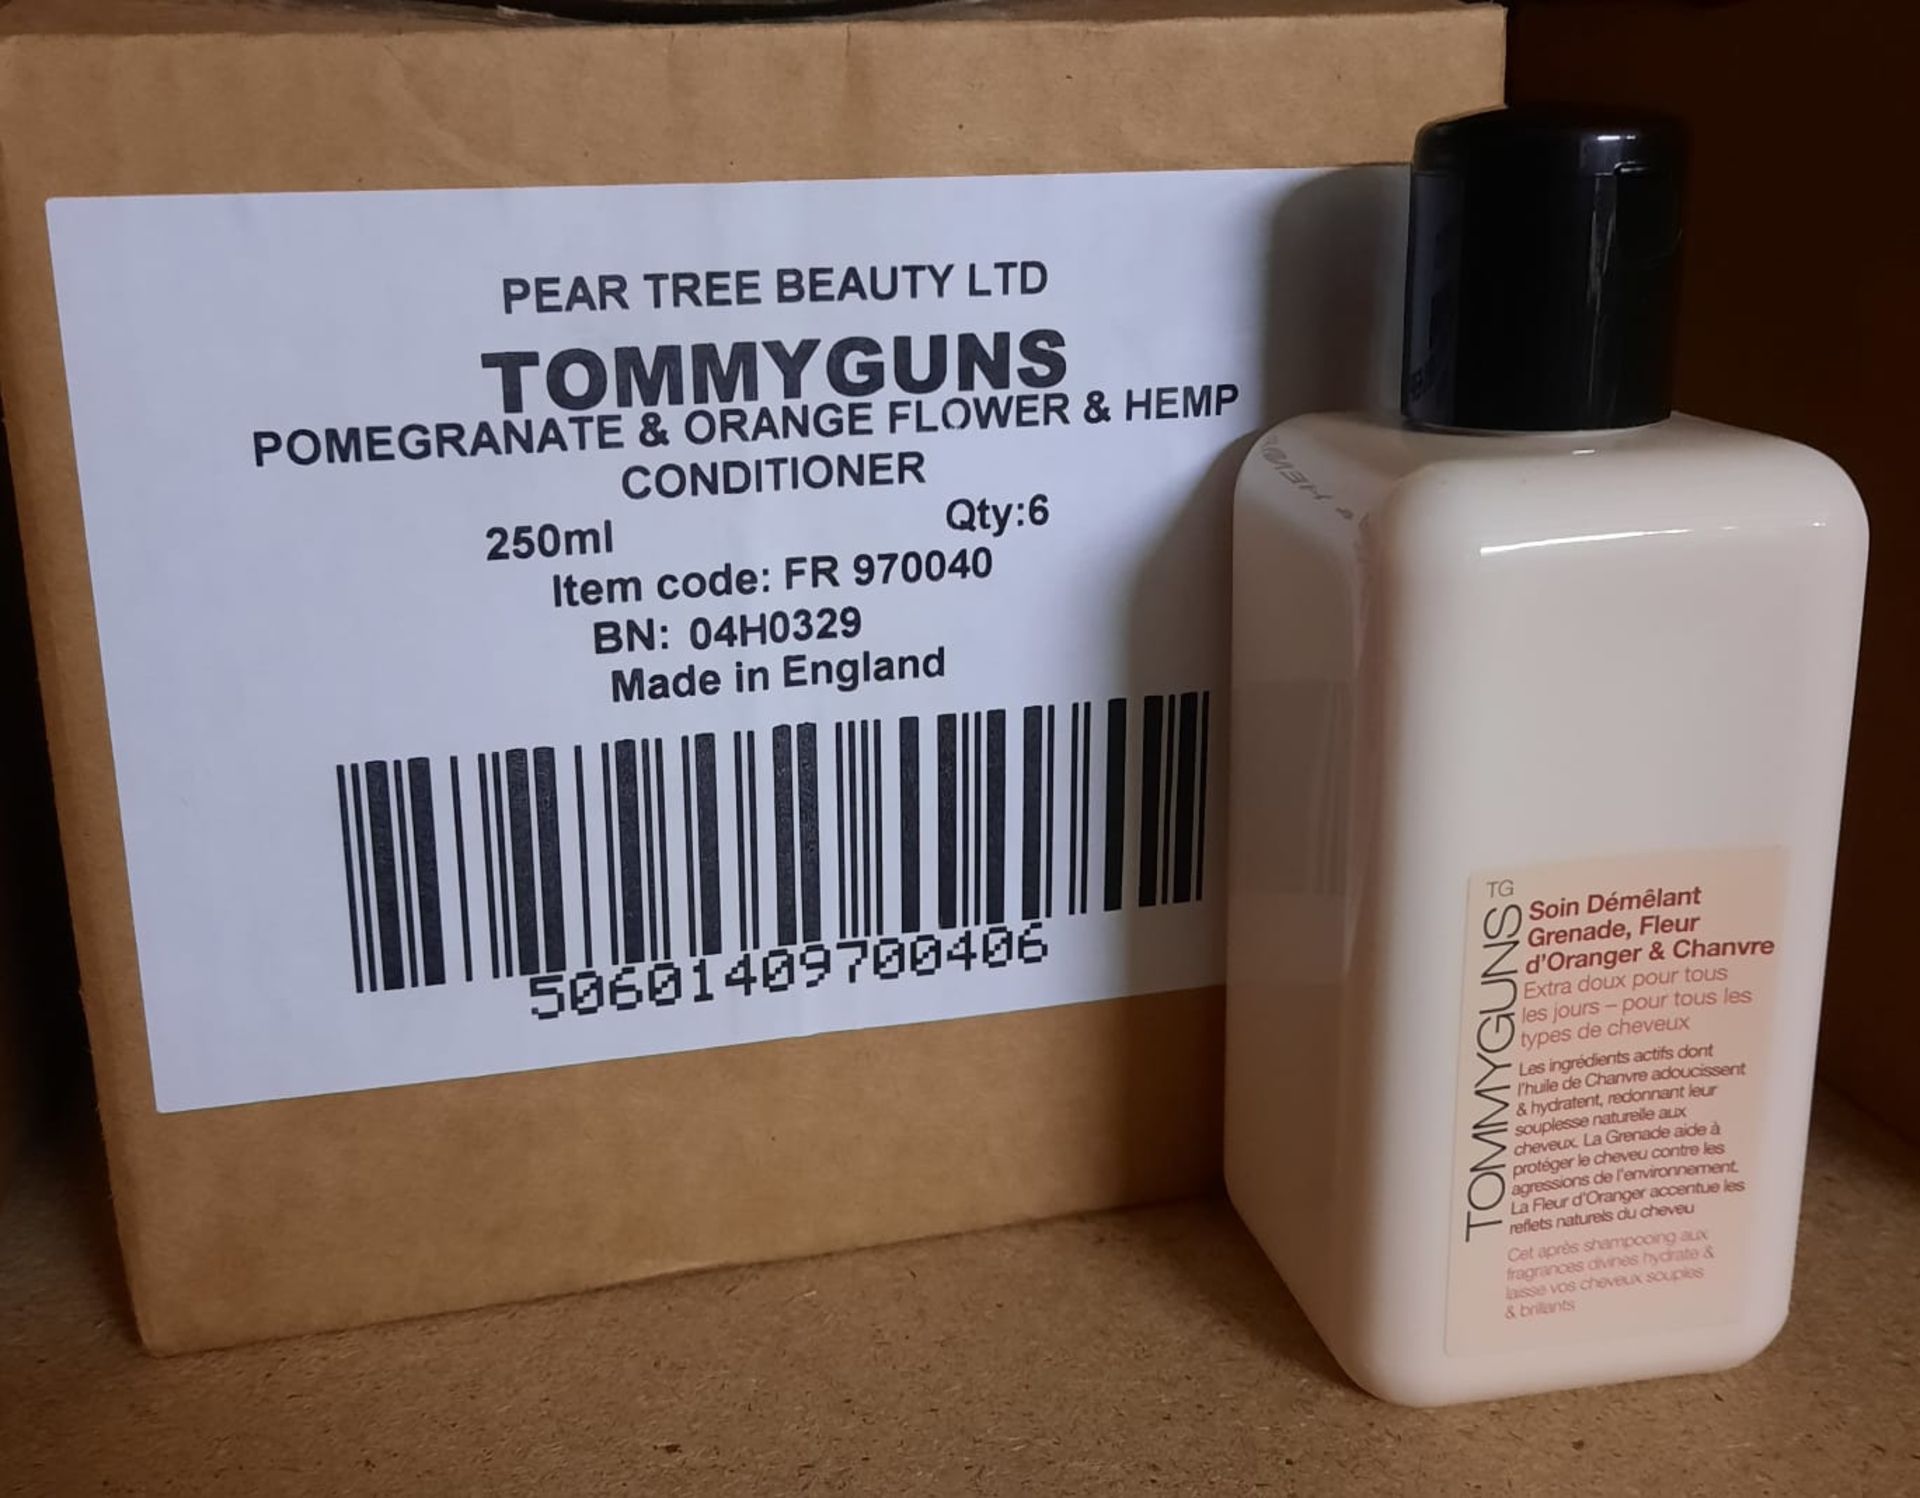 RRP £118.80 - X 4 BOXES OF 6 TOMMYGUNS POMEGRANATE ORANGE FLOWER & HEMP CONDITIONER FOR TYPE OF